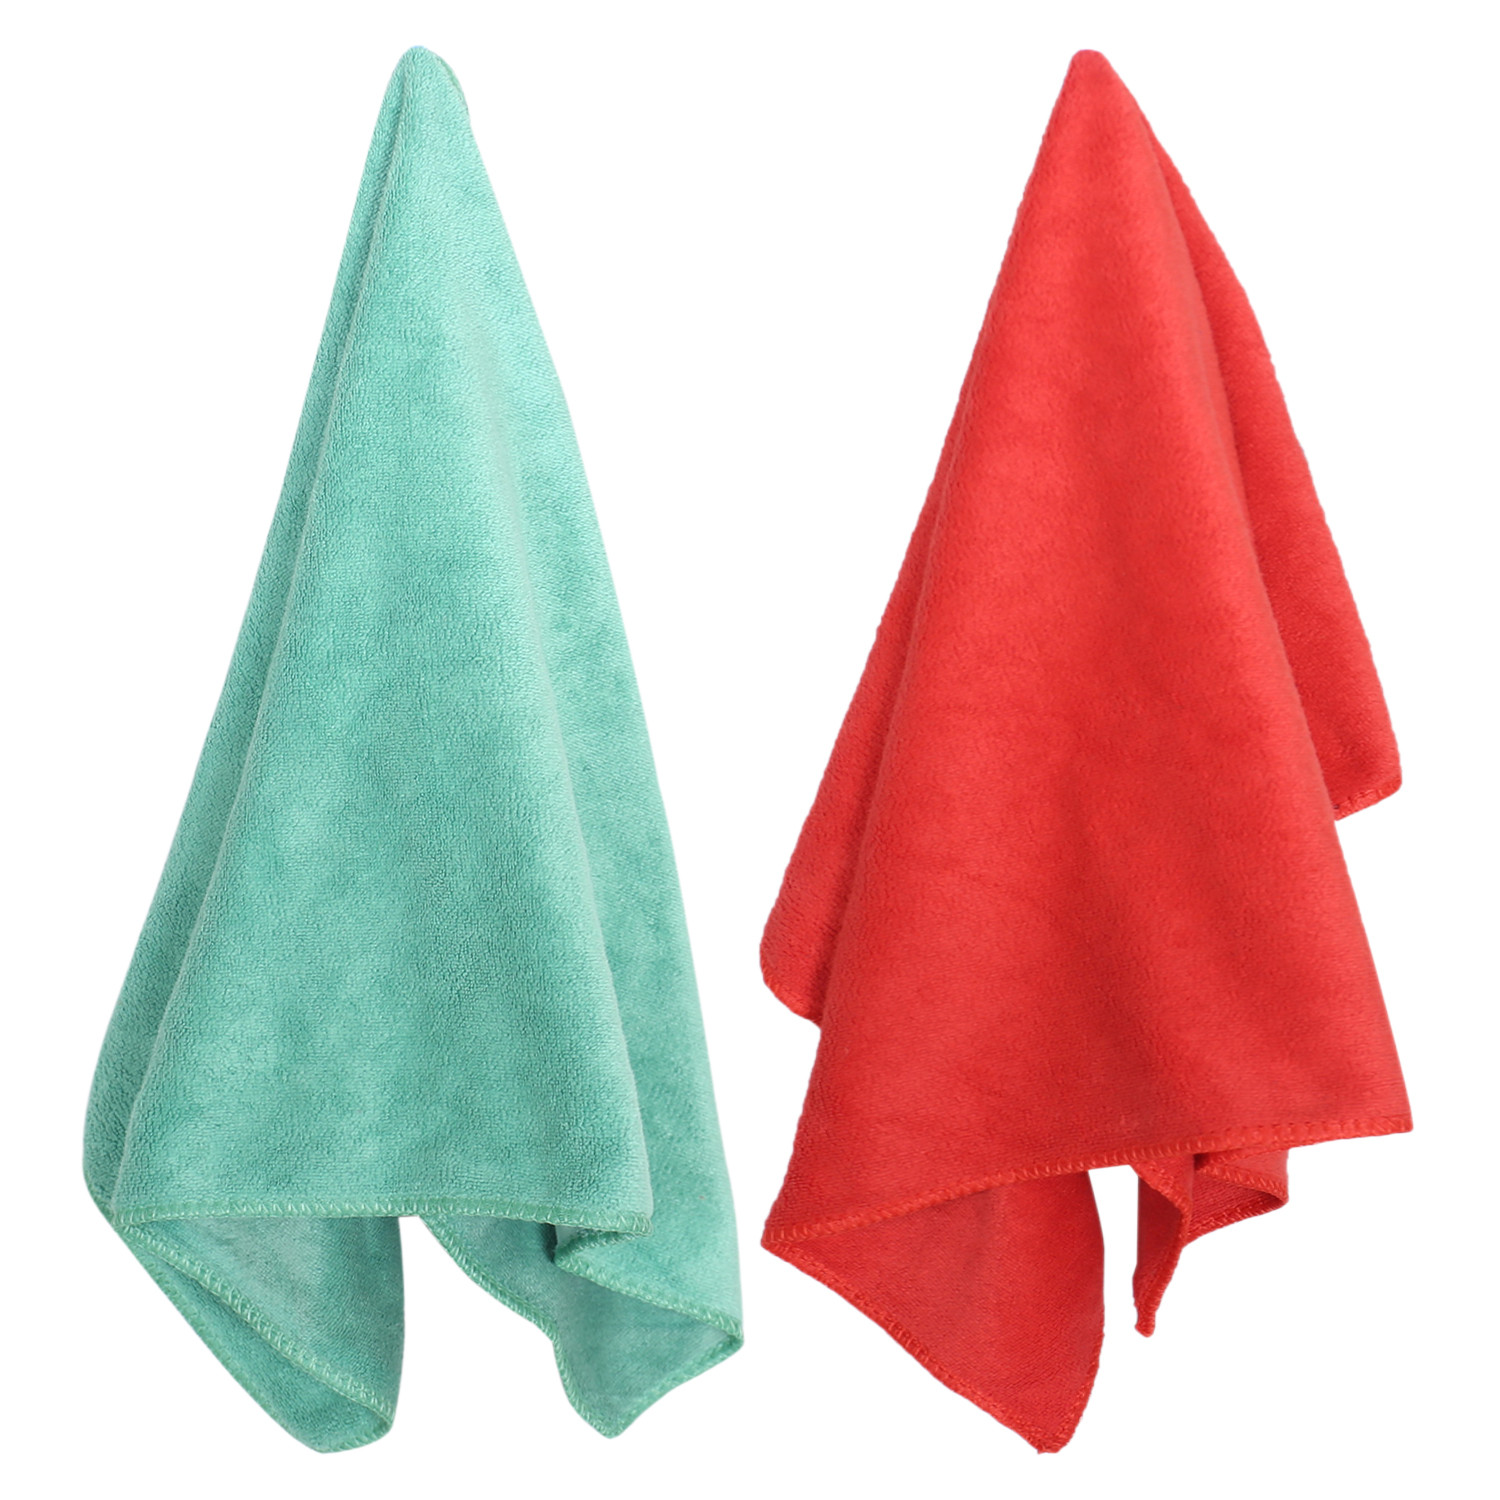 Kuber Industries Cleaning Cloths|Microfiber Highly Absorbent Wash Towels for Kitchen,Car,Window,24 x 16 Inch,Pack of 2 (Green & Red)